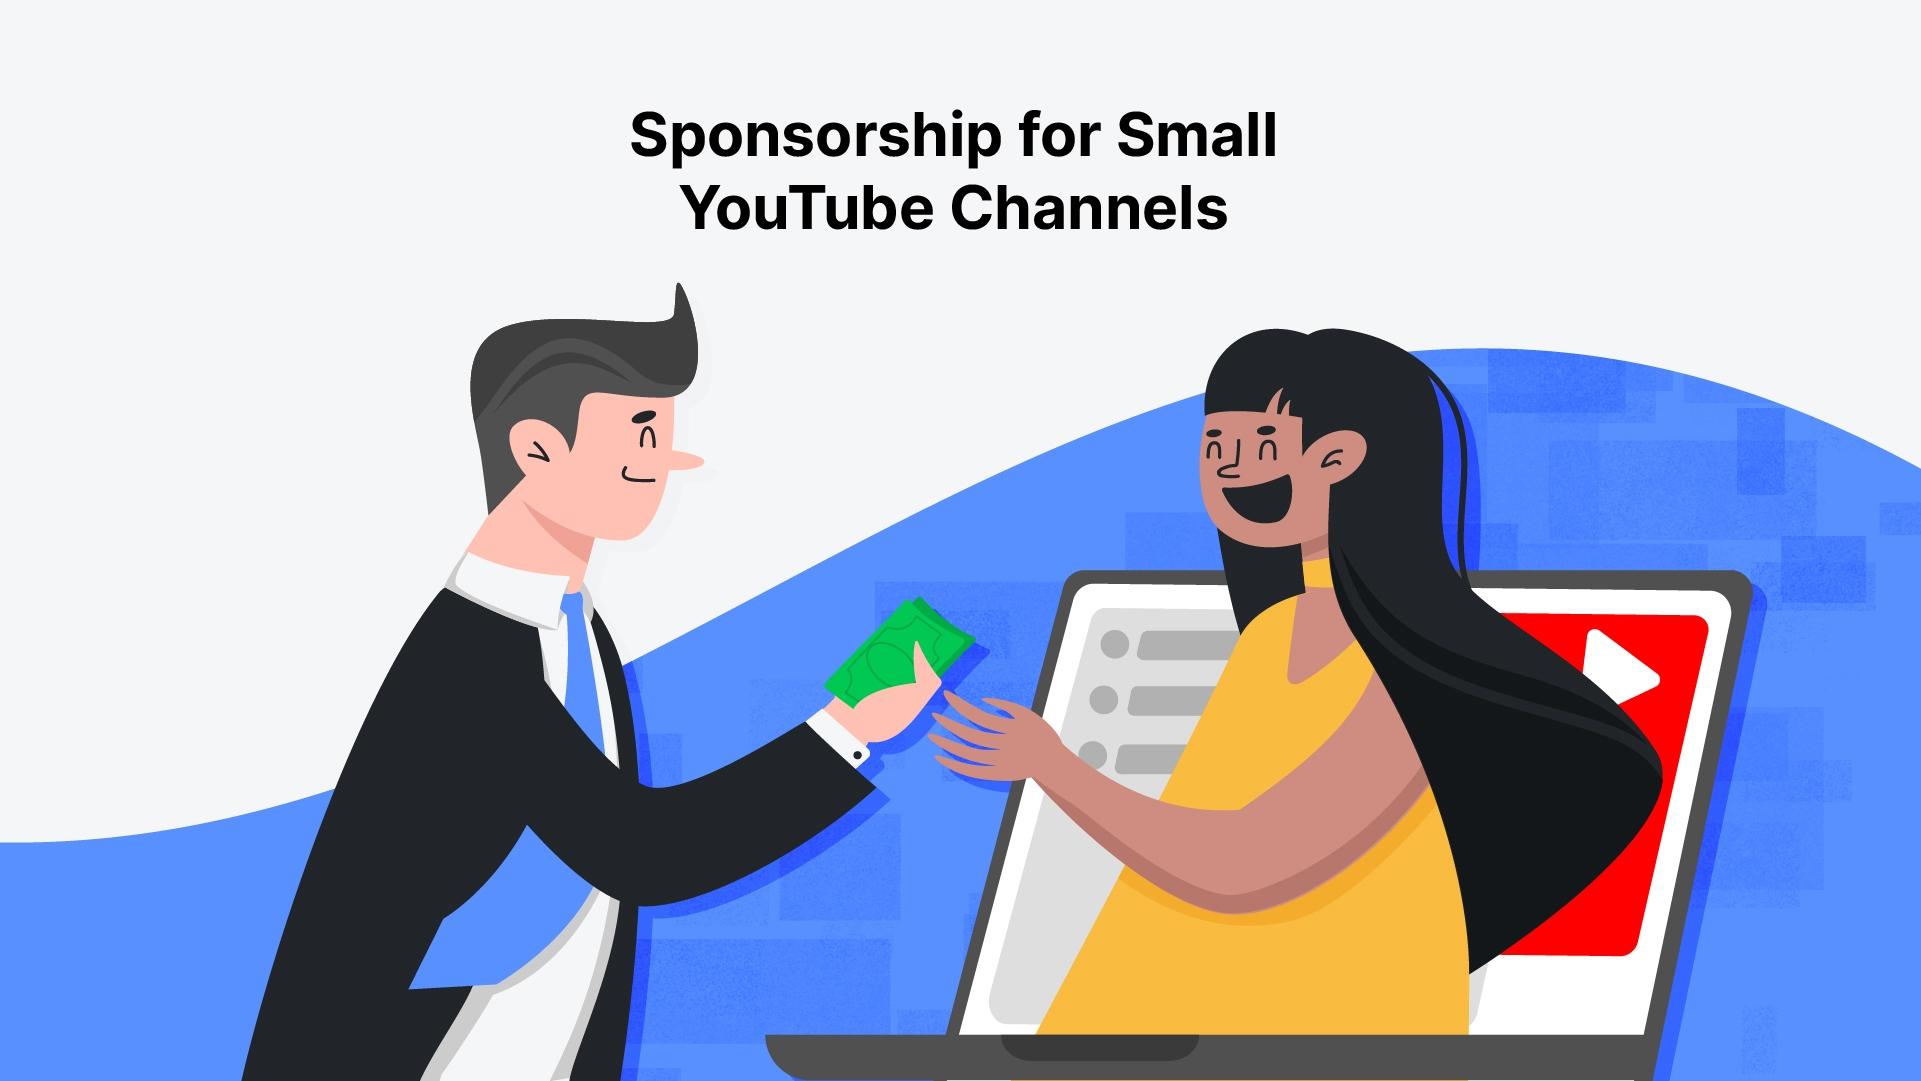 Sponsorships for small Youtube channels